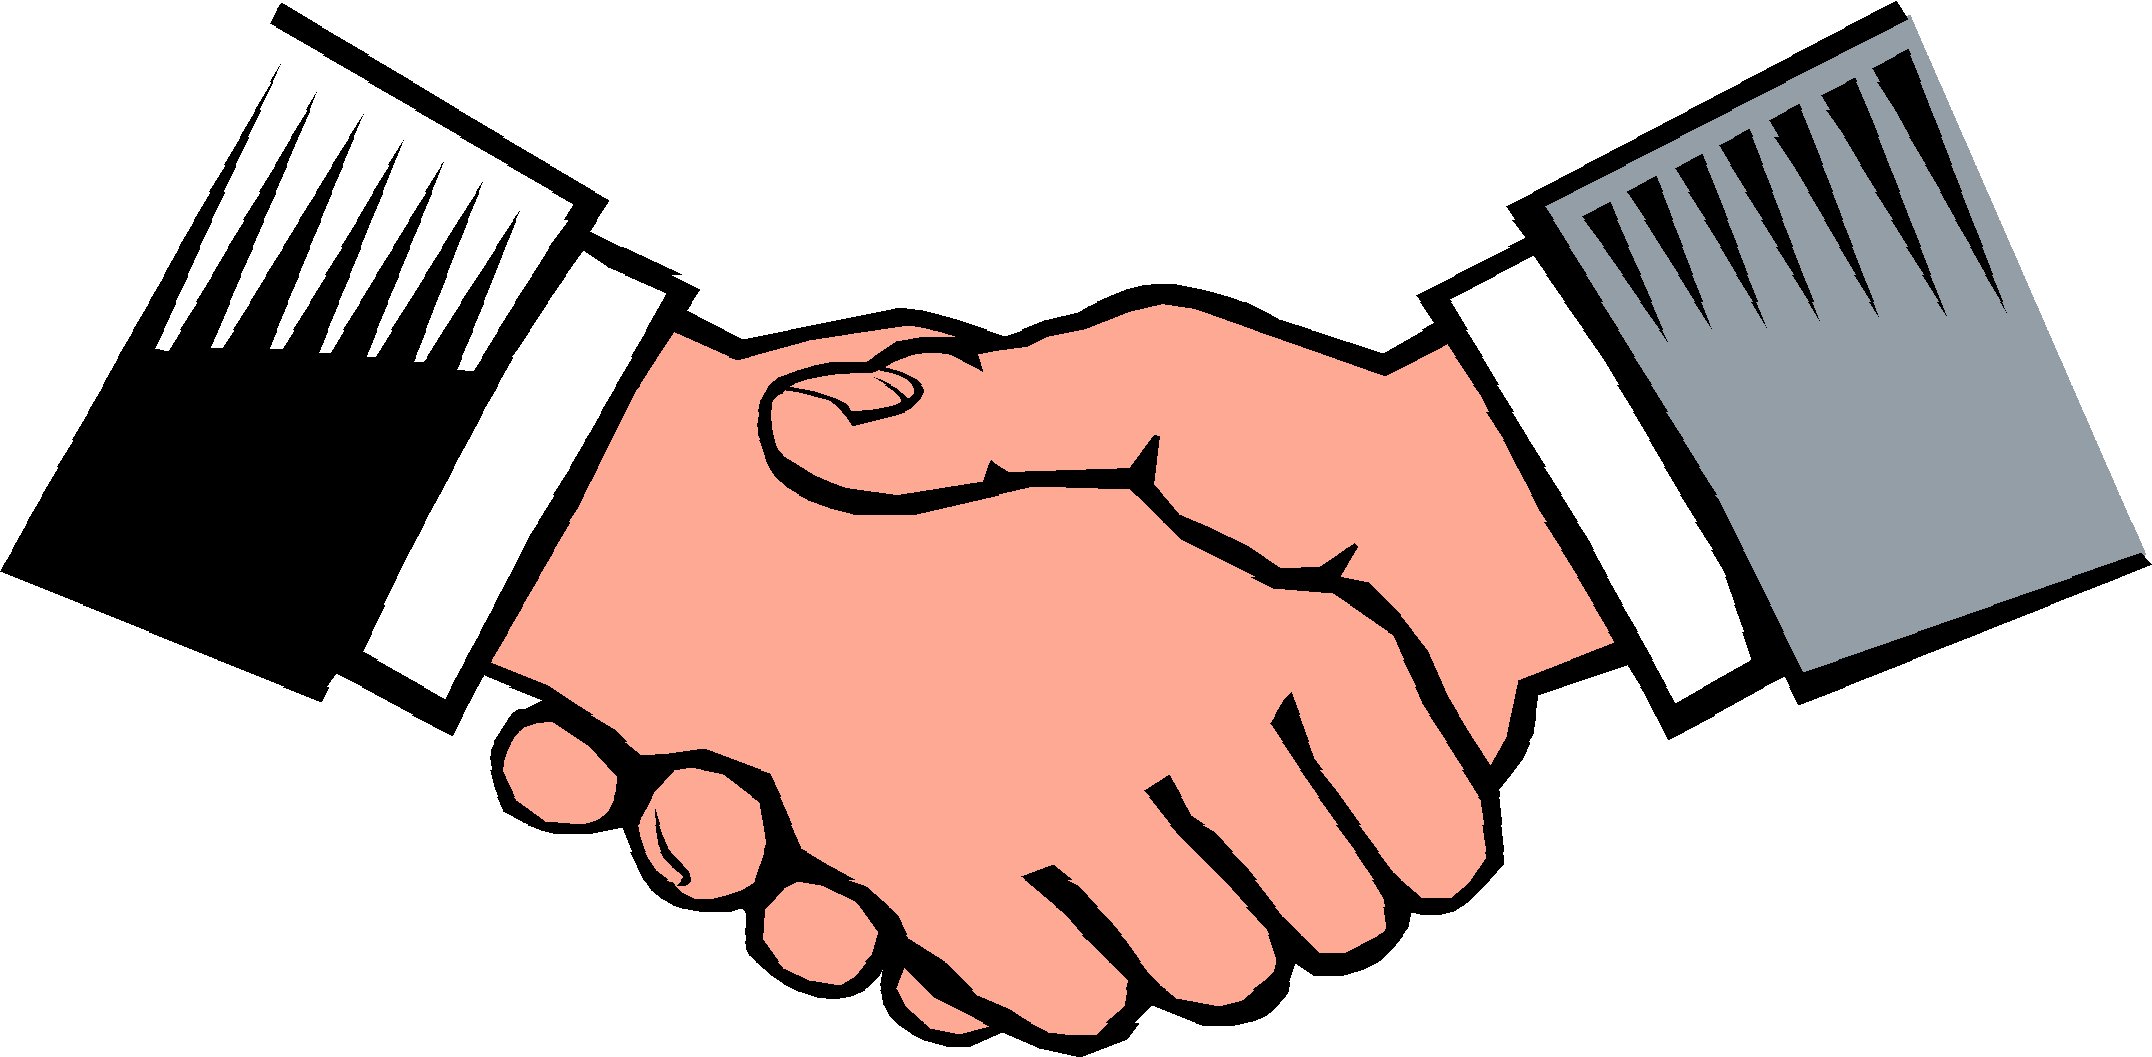 Hands Shaking Picture - Hand Shake Clipart